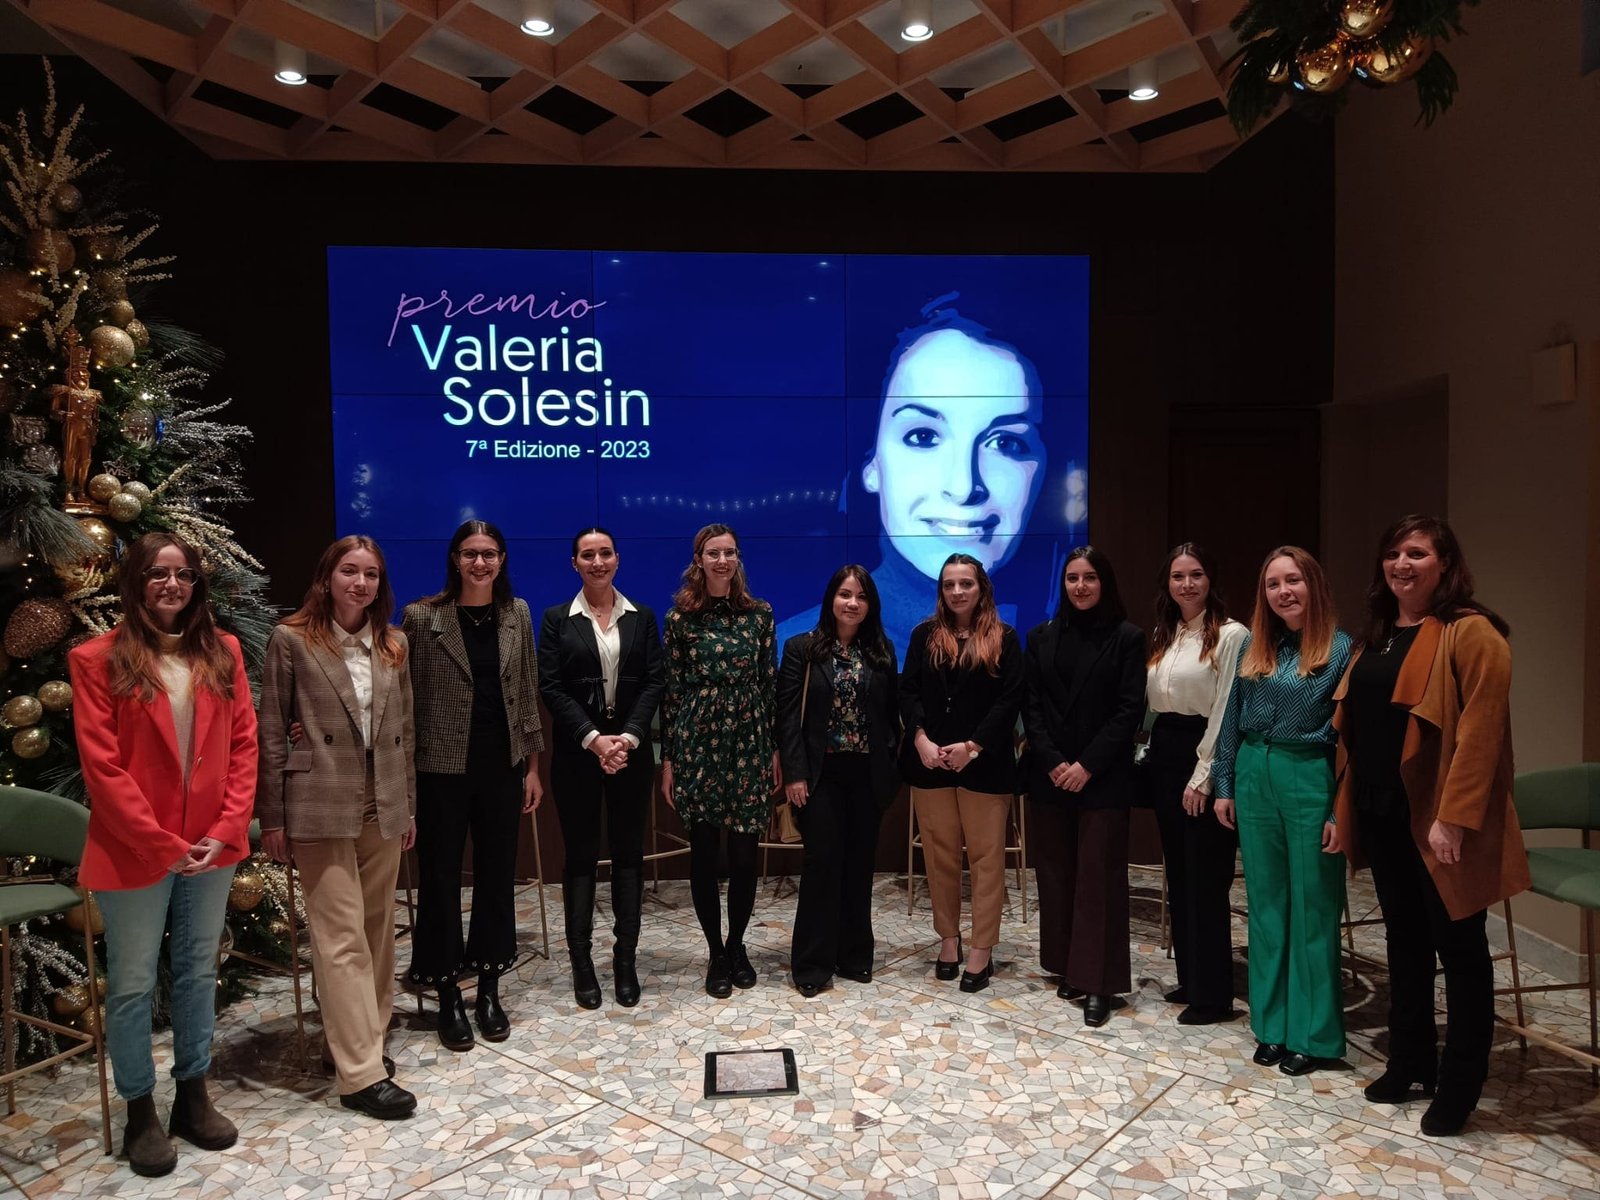 The Valeria Solesin Award to students who speak of female talent